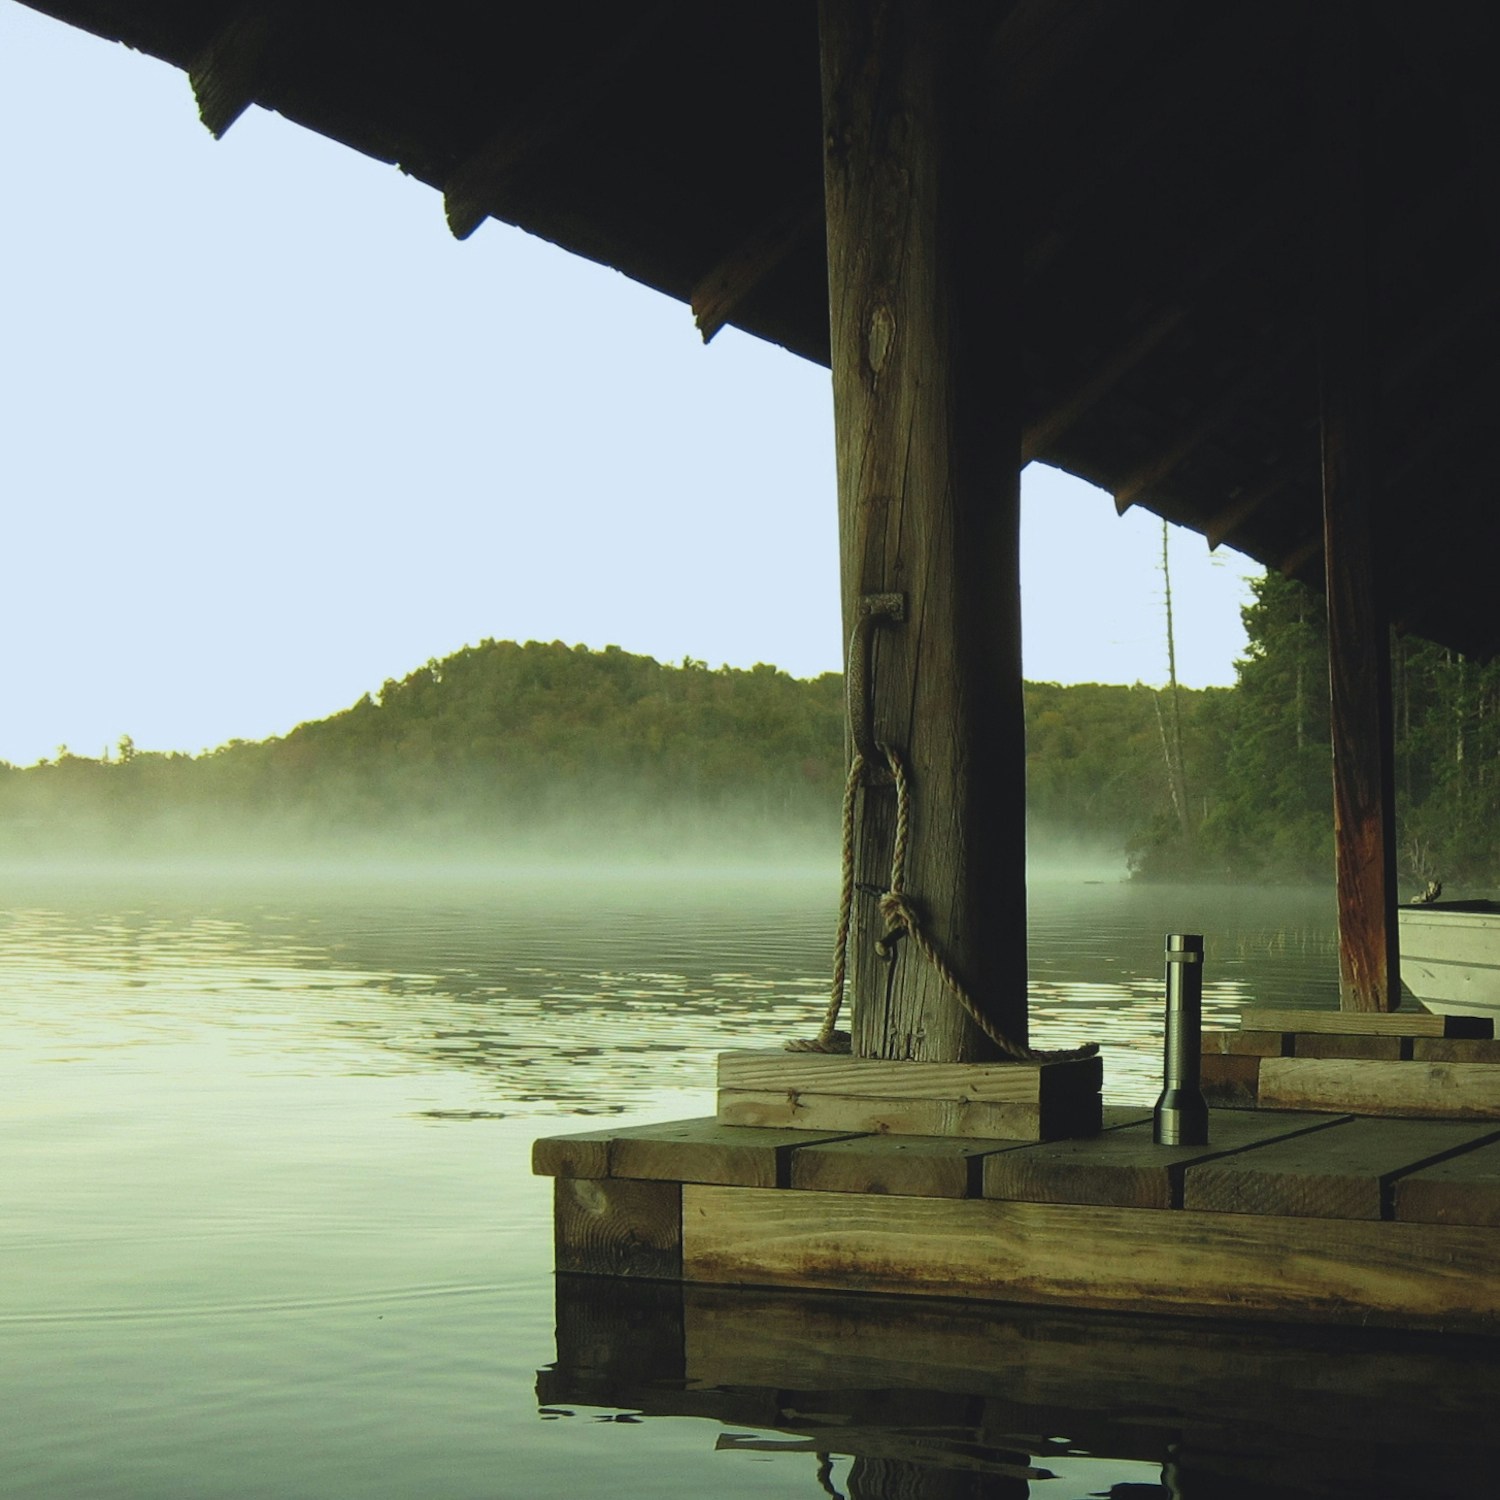 fog surrounds the dock on a lake during the day